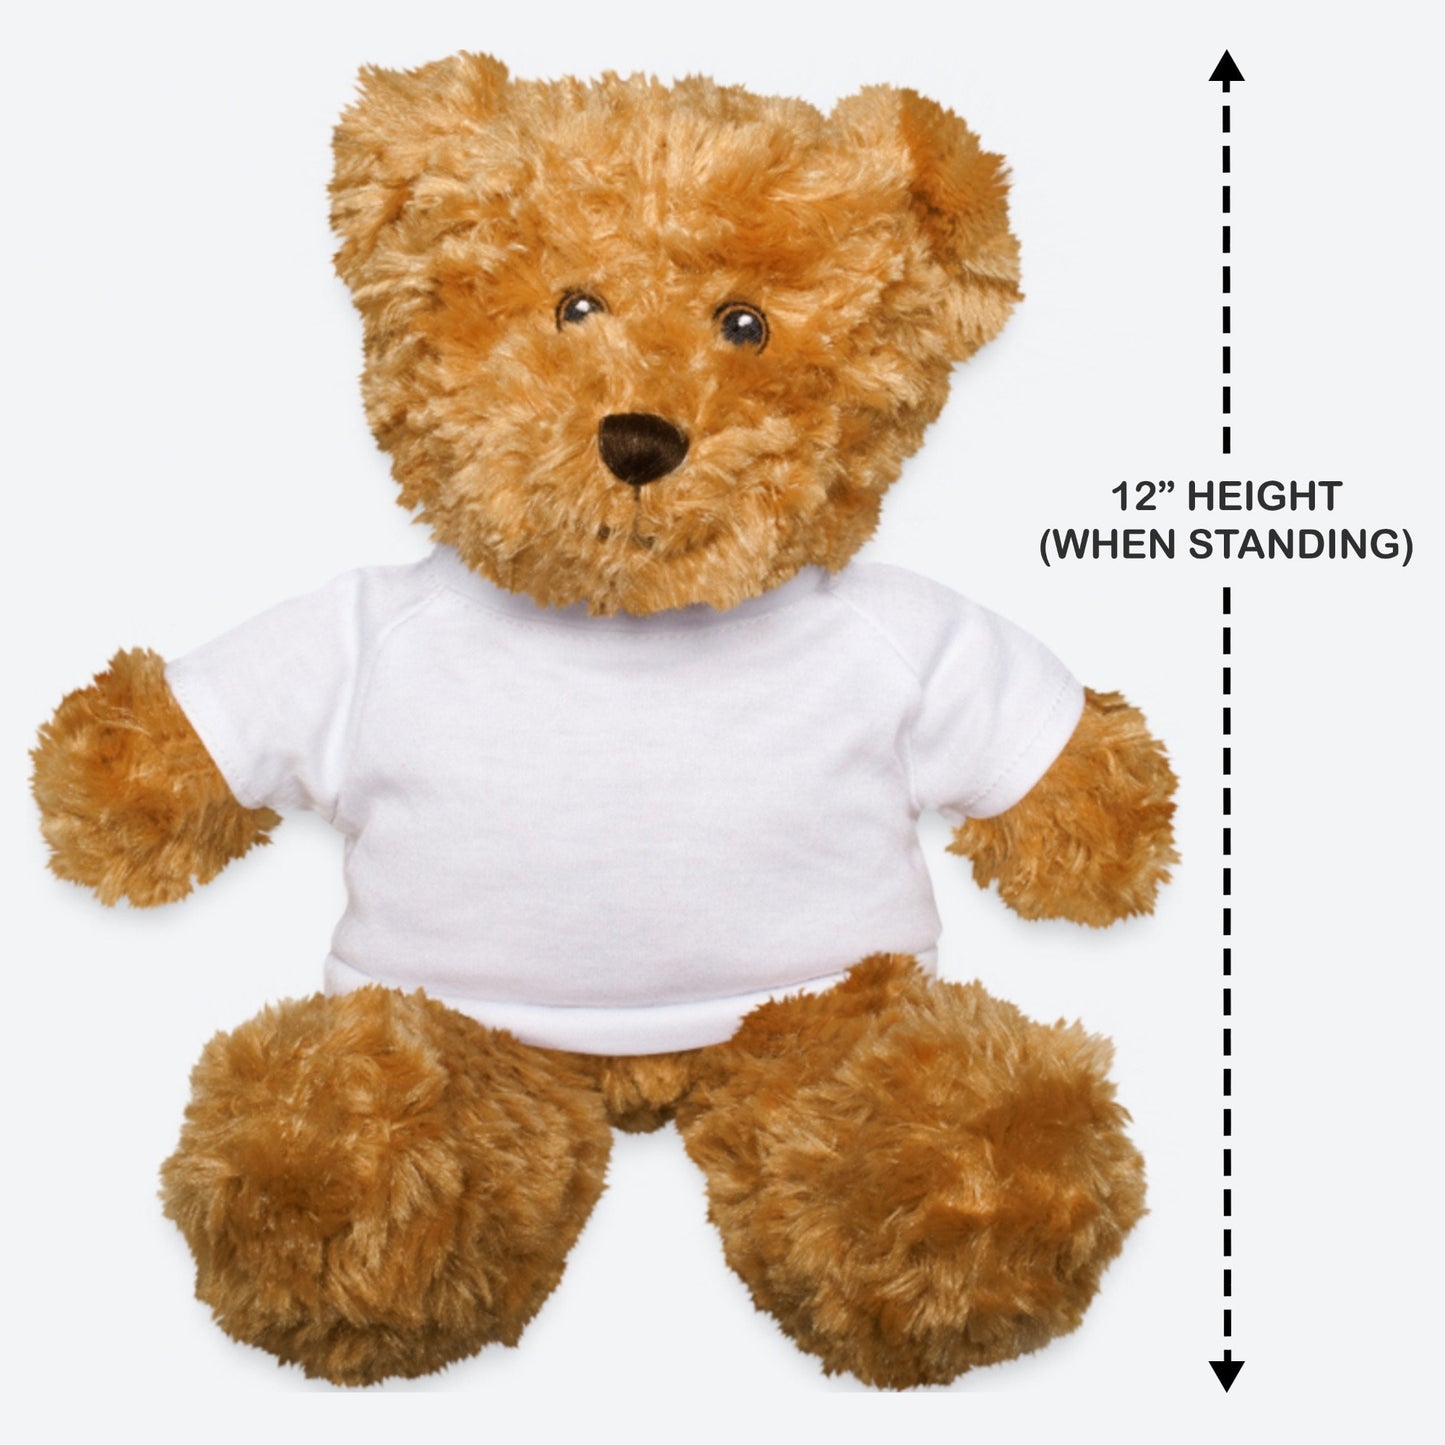 Teddy In A TShirt Personalized Bear Gift, Graduation Bear, Christmas Bear, Memorial Gift for Grandchild, Teddy Baby Shower Gift from Grandma